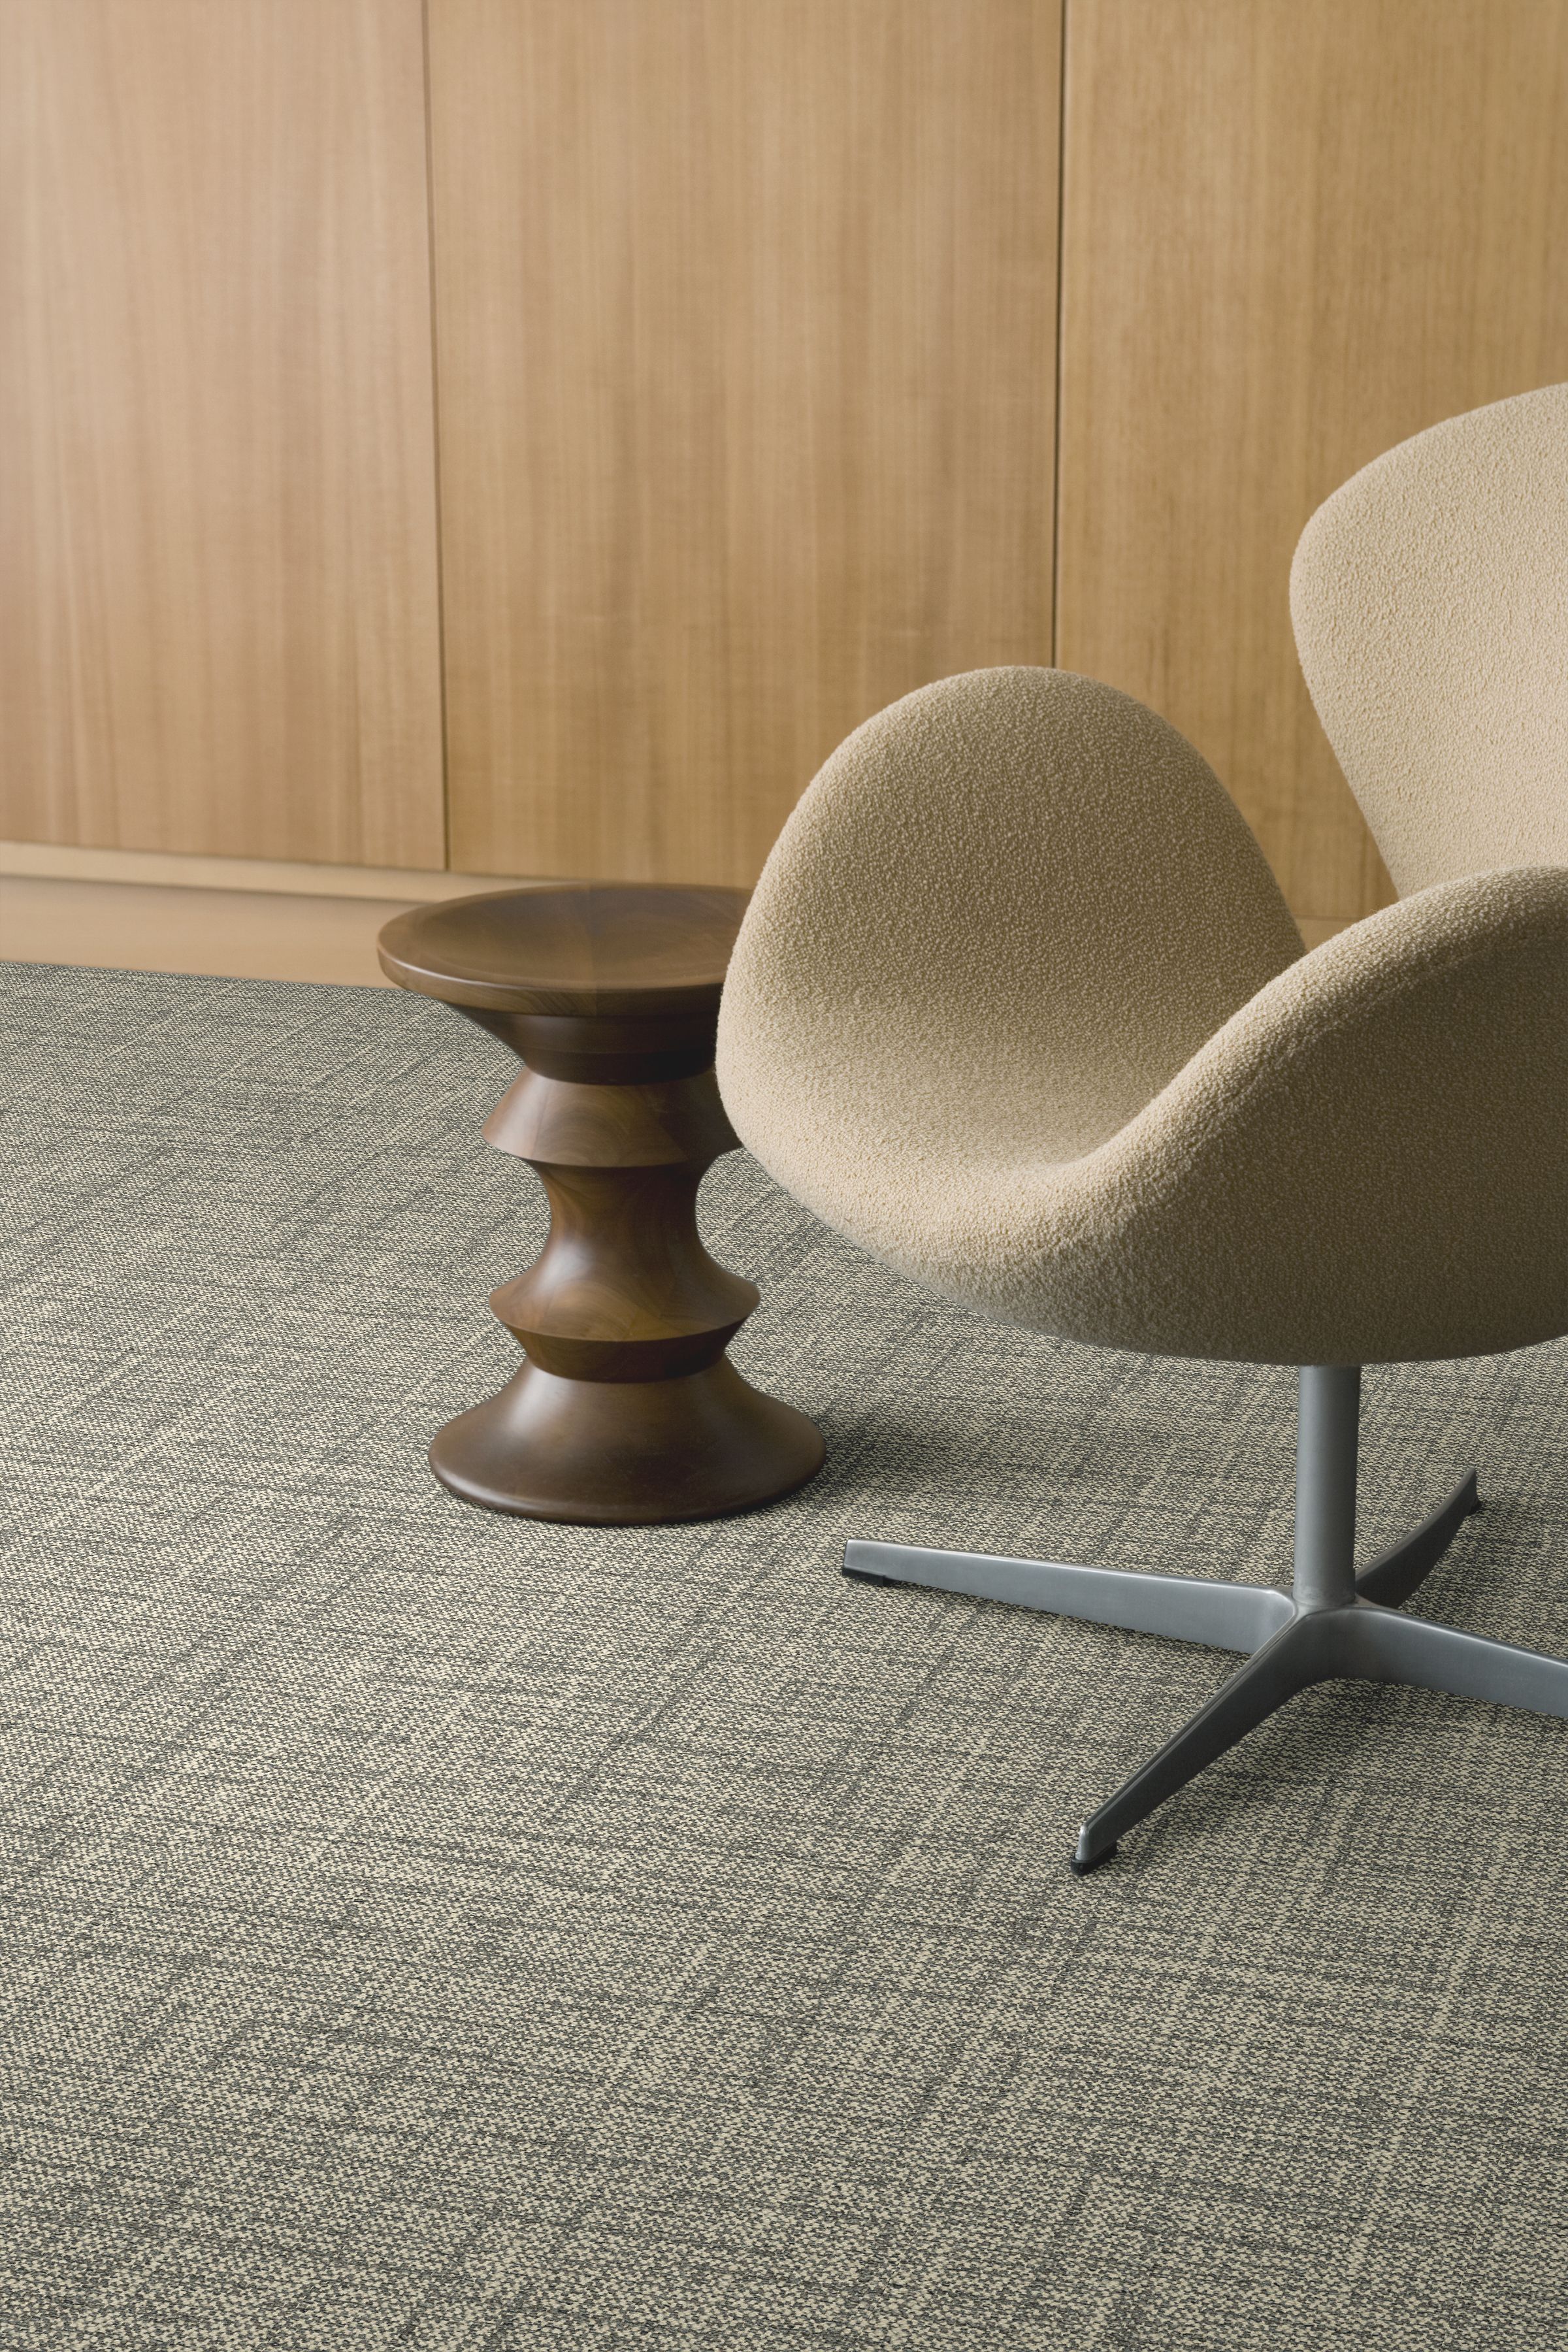 Interface Diminuendo plank carpet tile in close up with chair and small side table imagen número 8